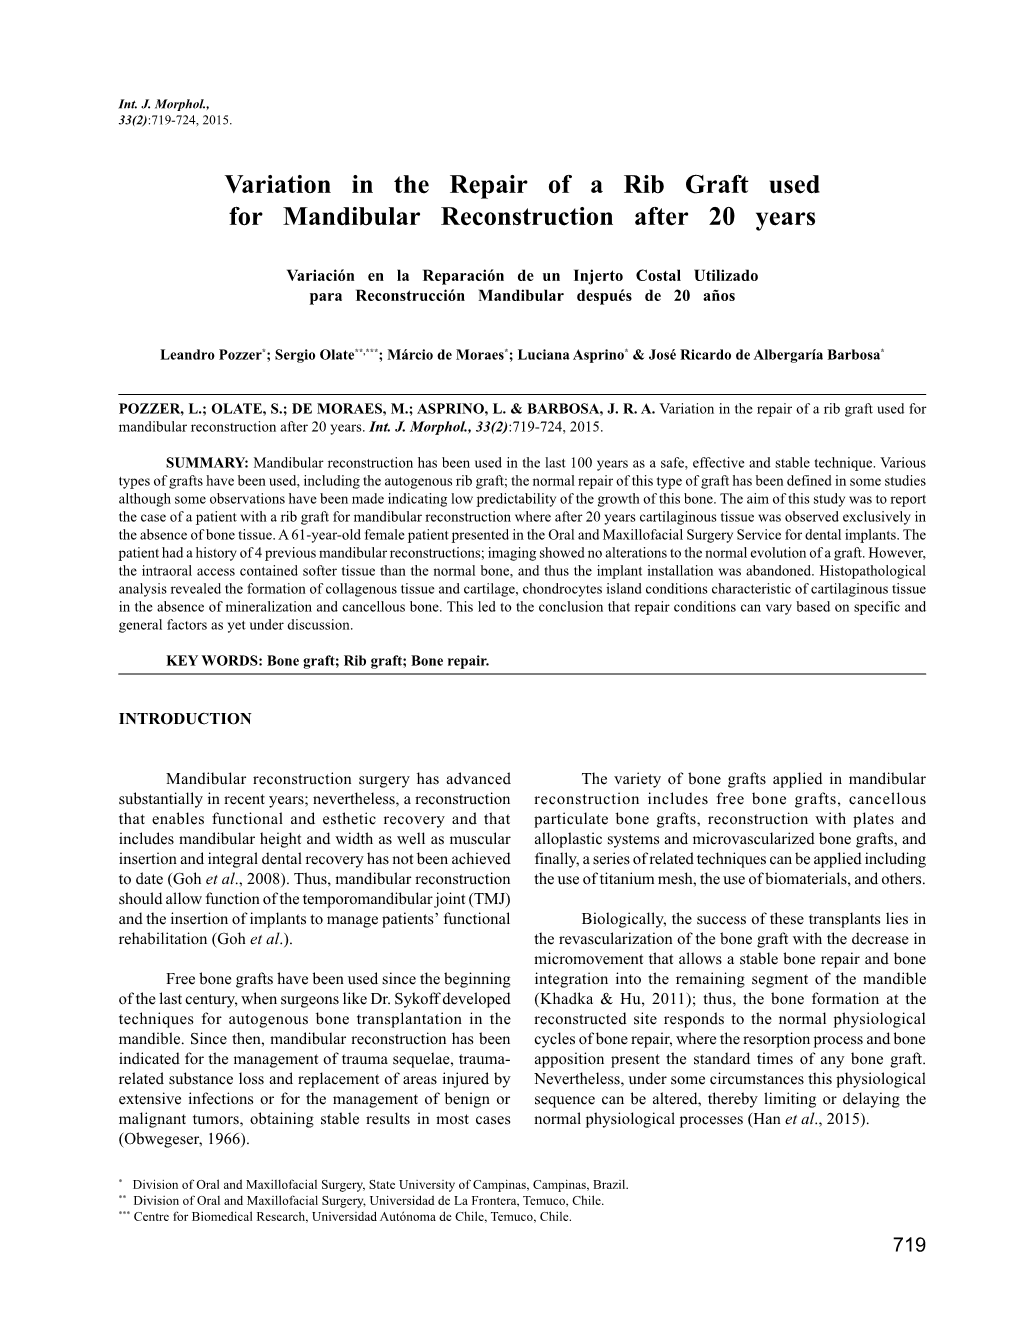 Variation in the Repair of a Rib Graft Used for Mandibular Reconstruction After 20 Years